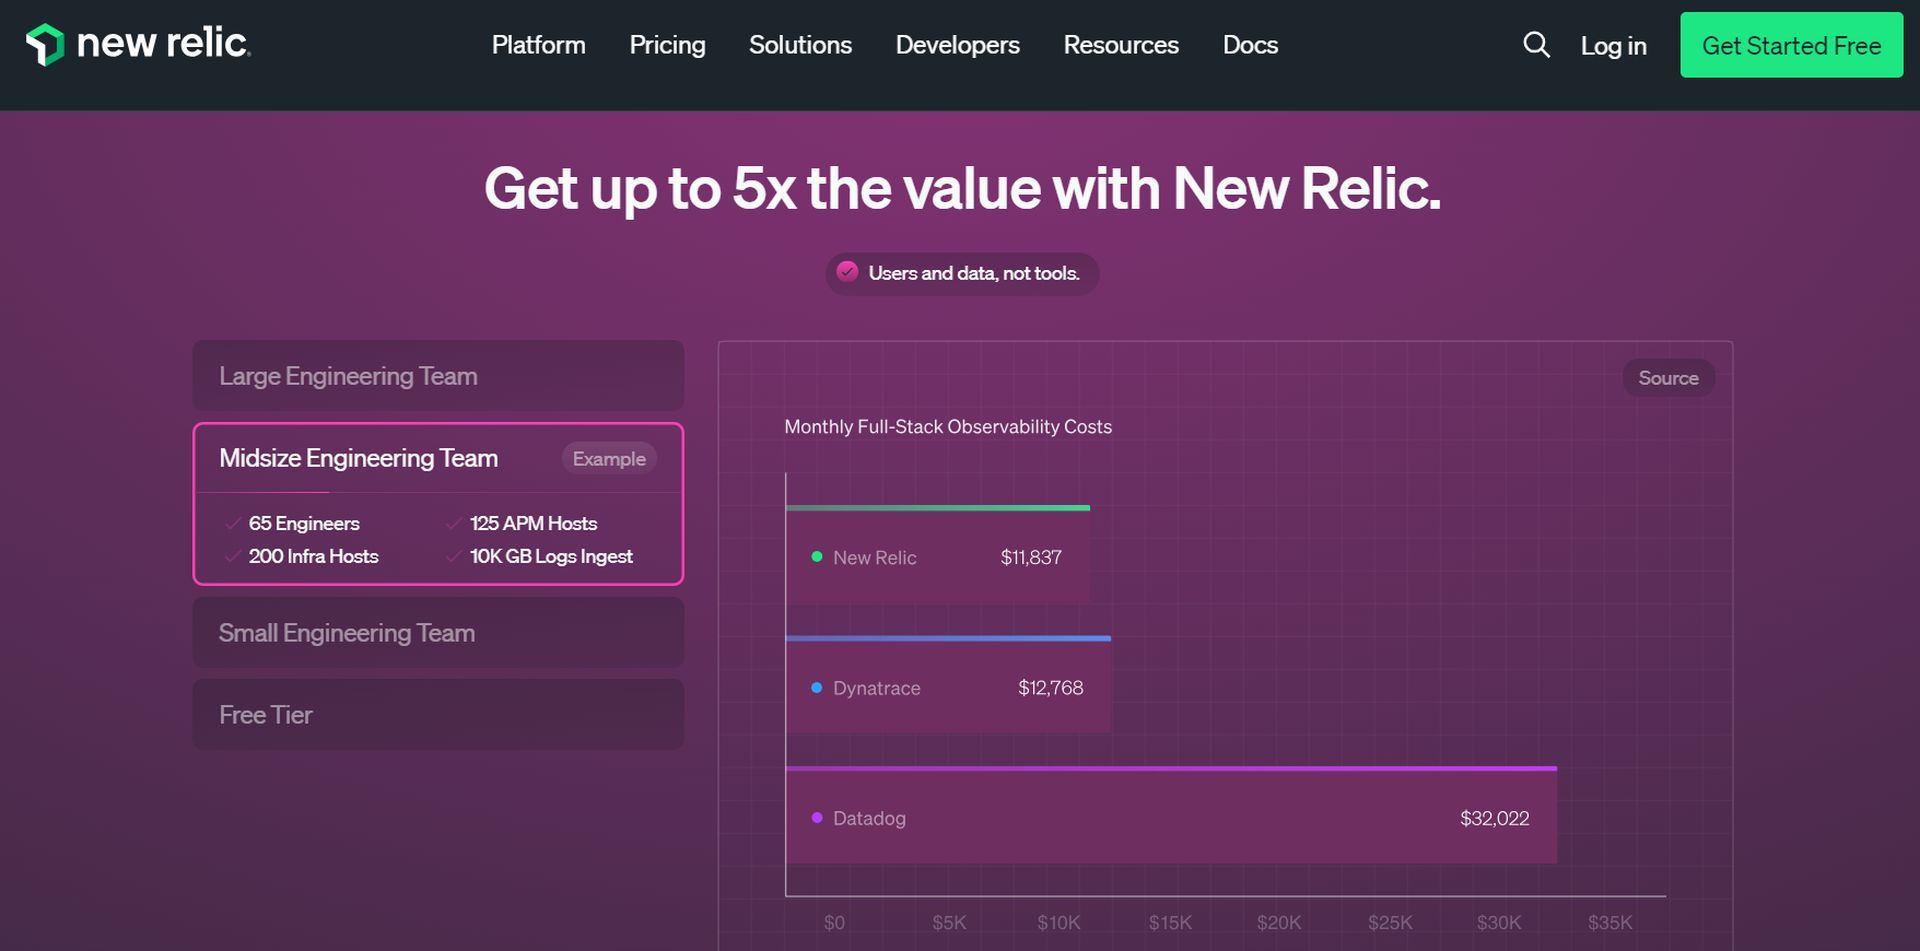 New Relic (Image credit)